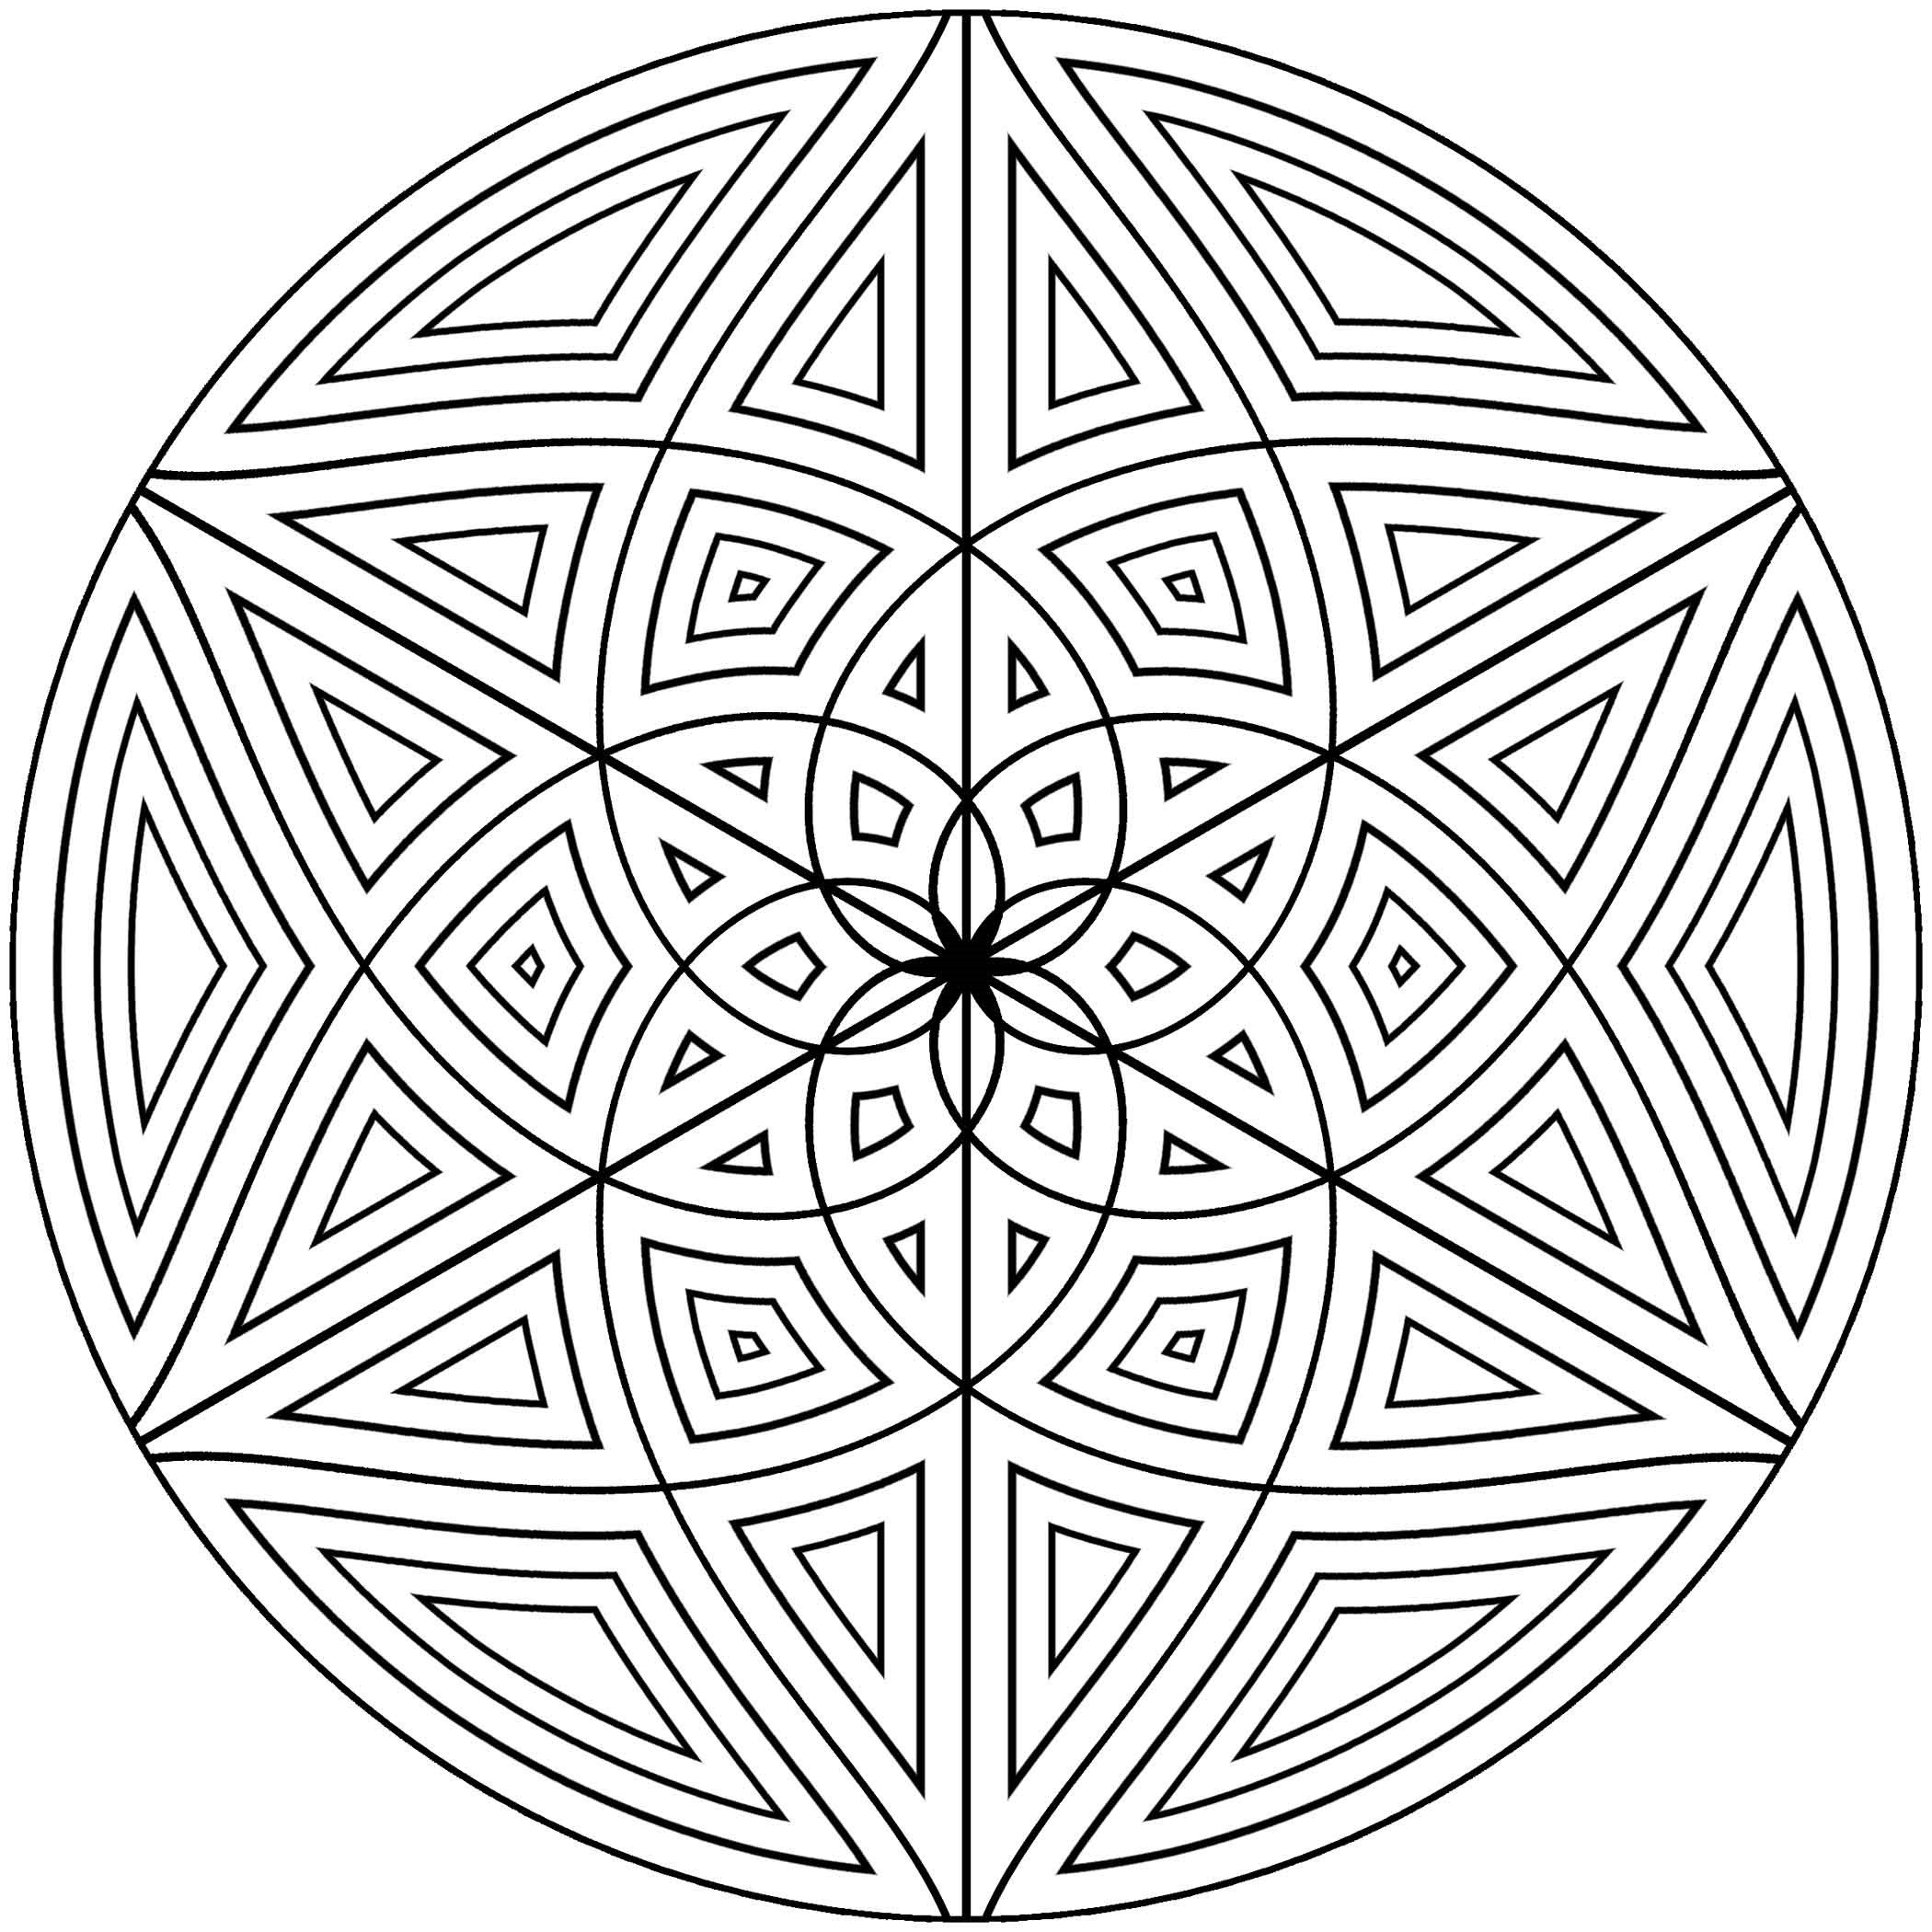 Coloring Pages For Adults Patterns
 Free Printable Geometric Coloring Pages for Adults